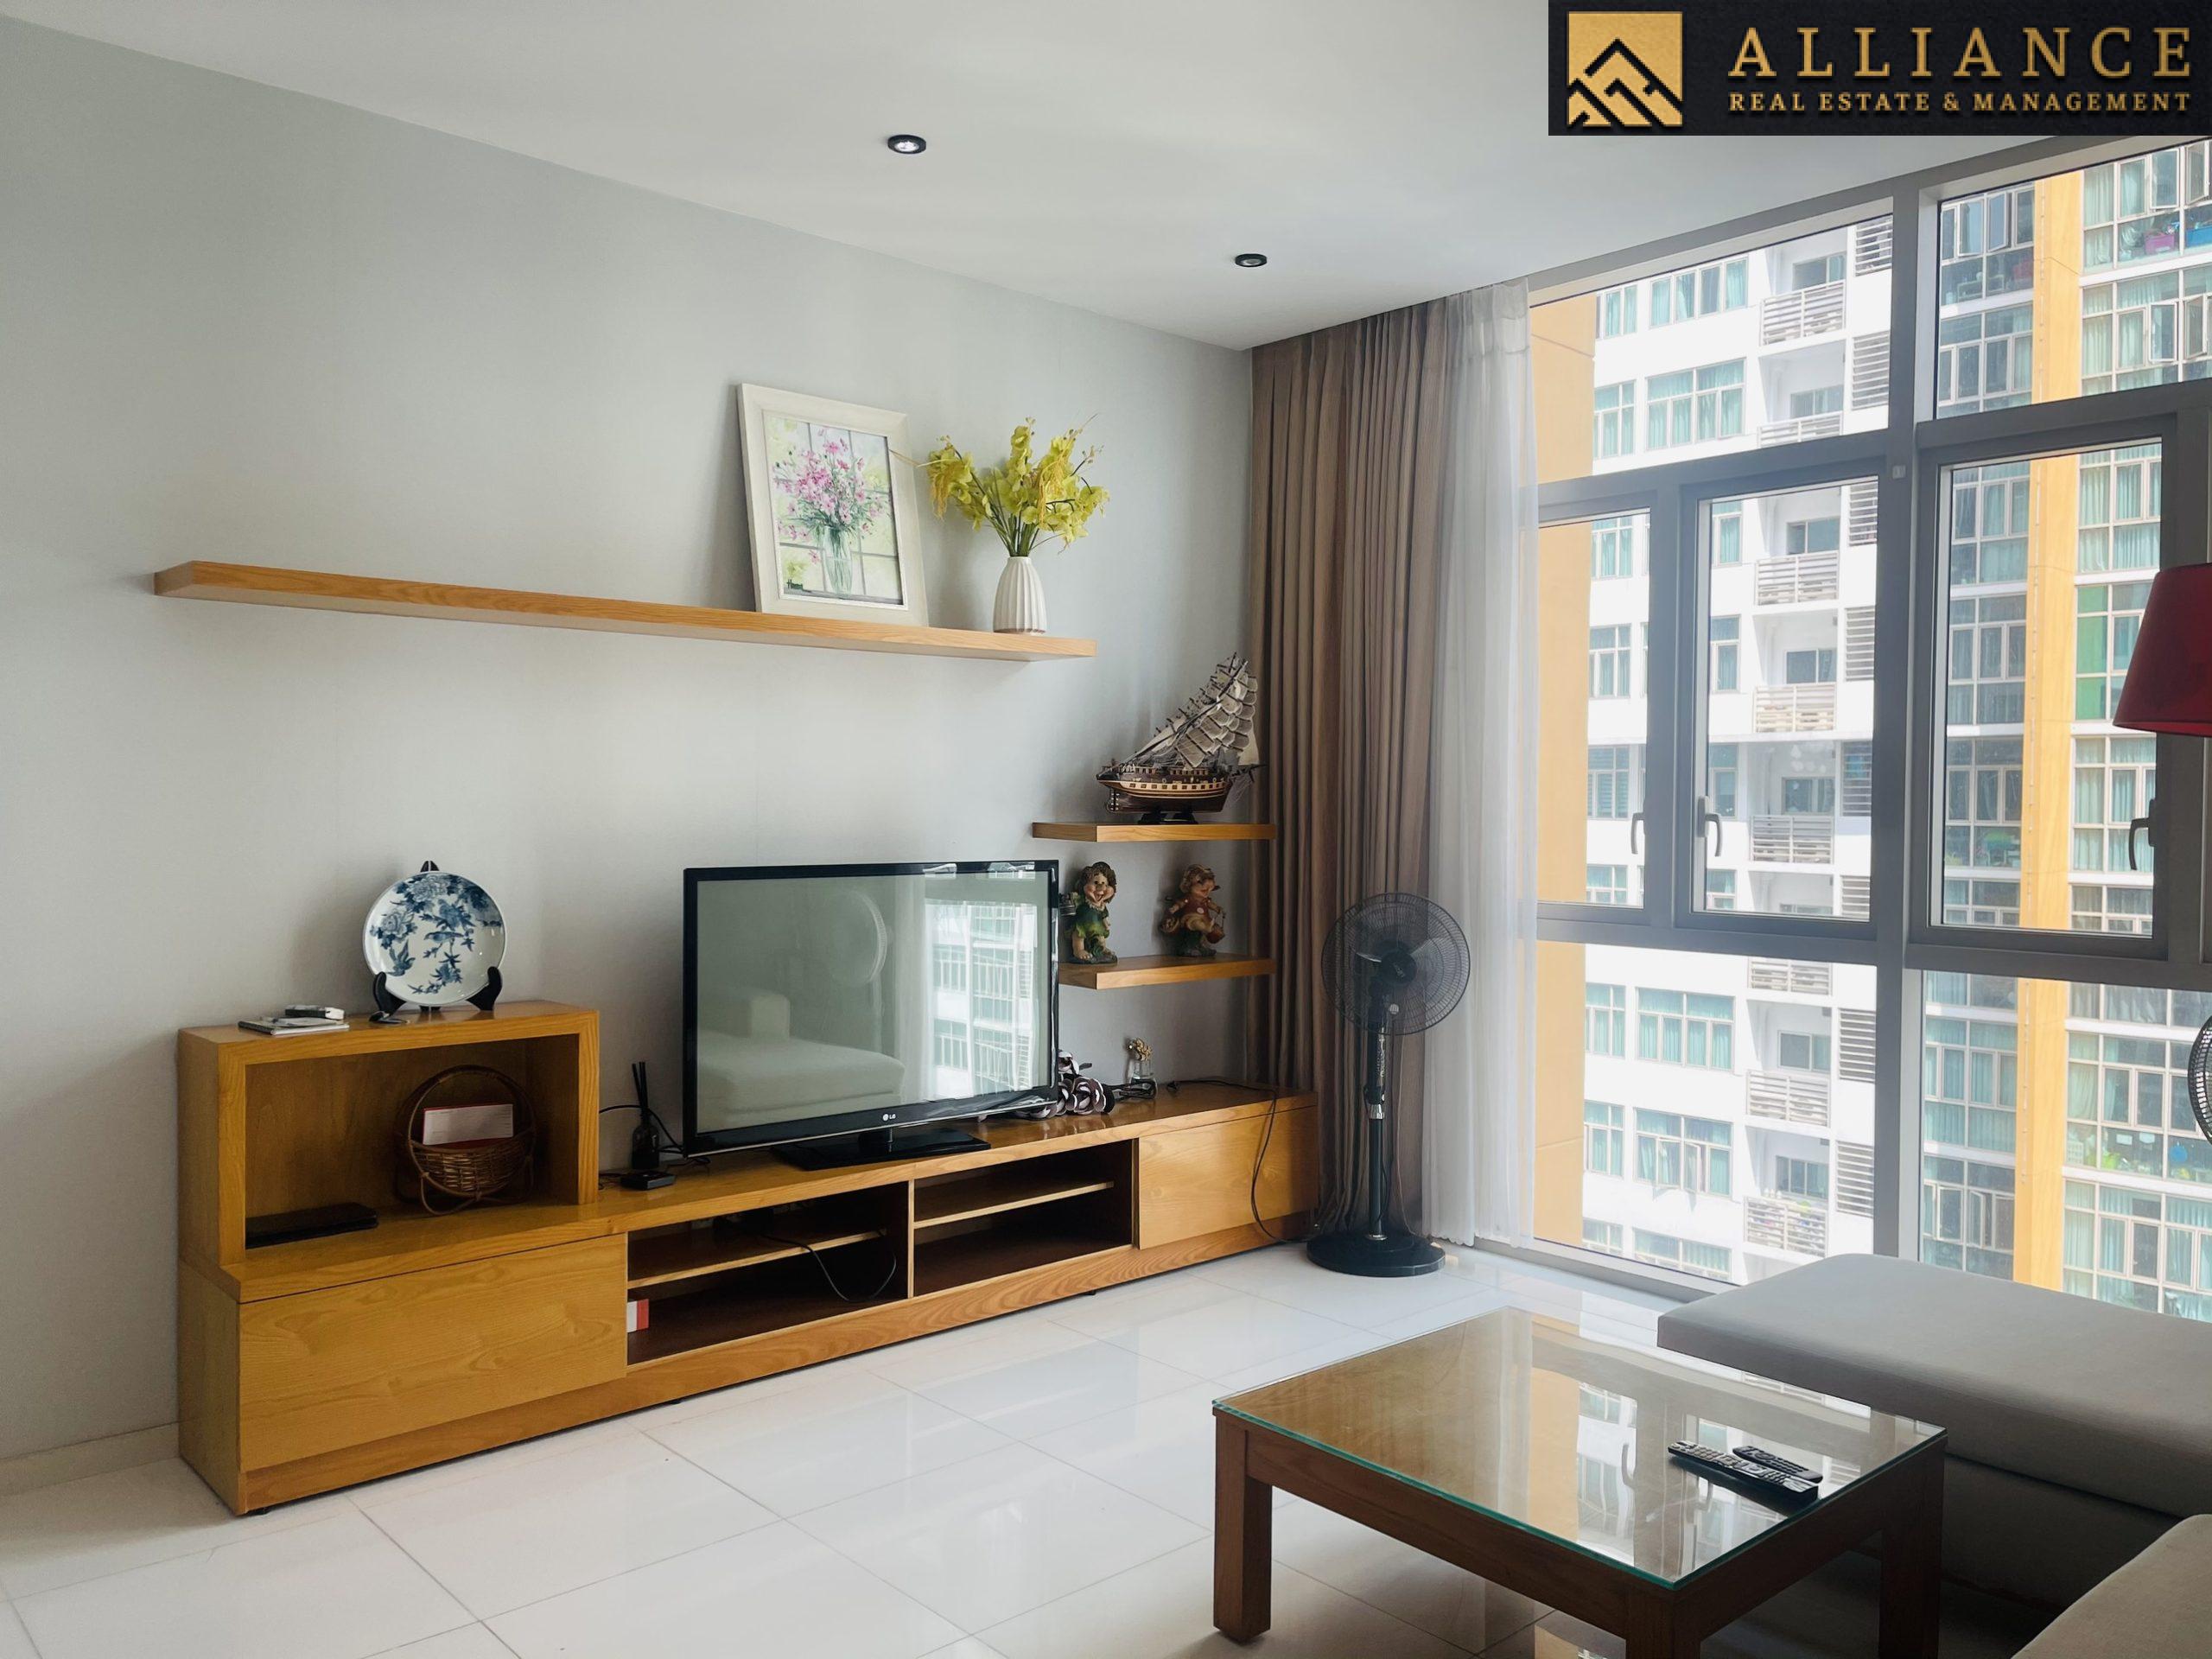 3 Bedroom Apartment (The Vista) for rent in An Phu Ward, Thu Duc City, HCM City.